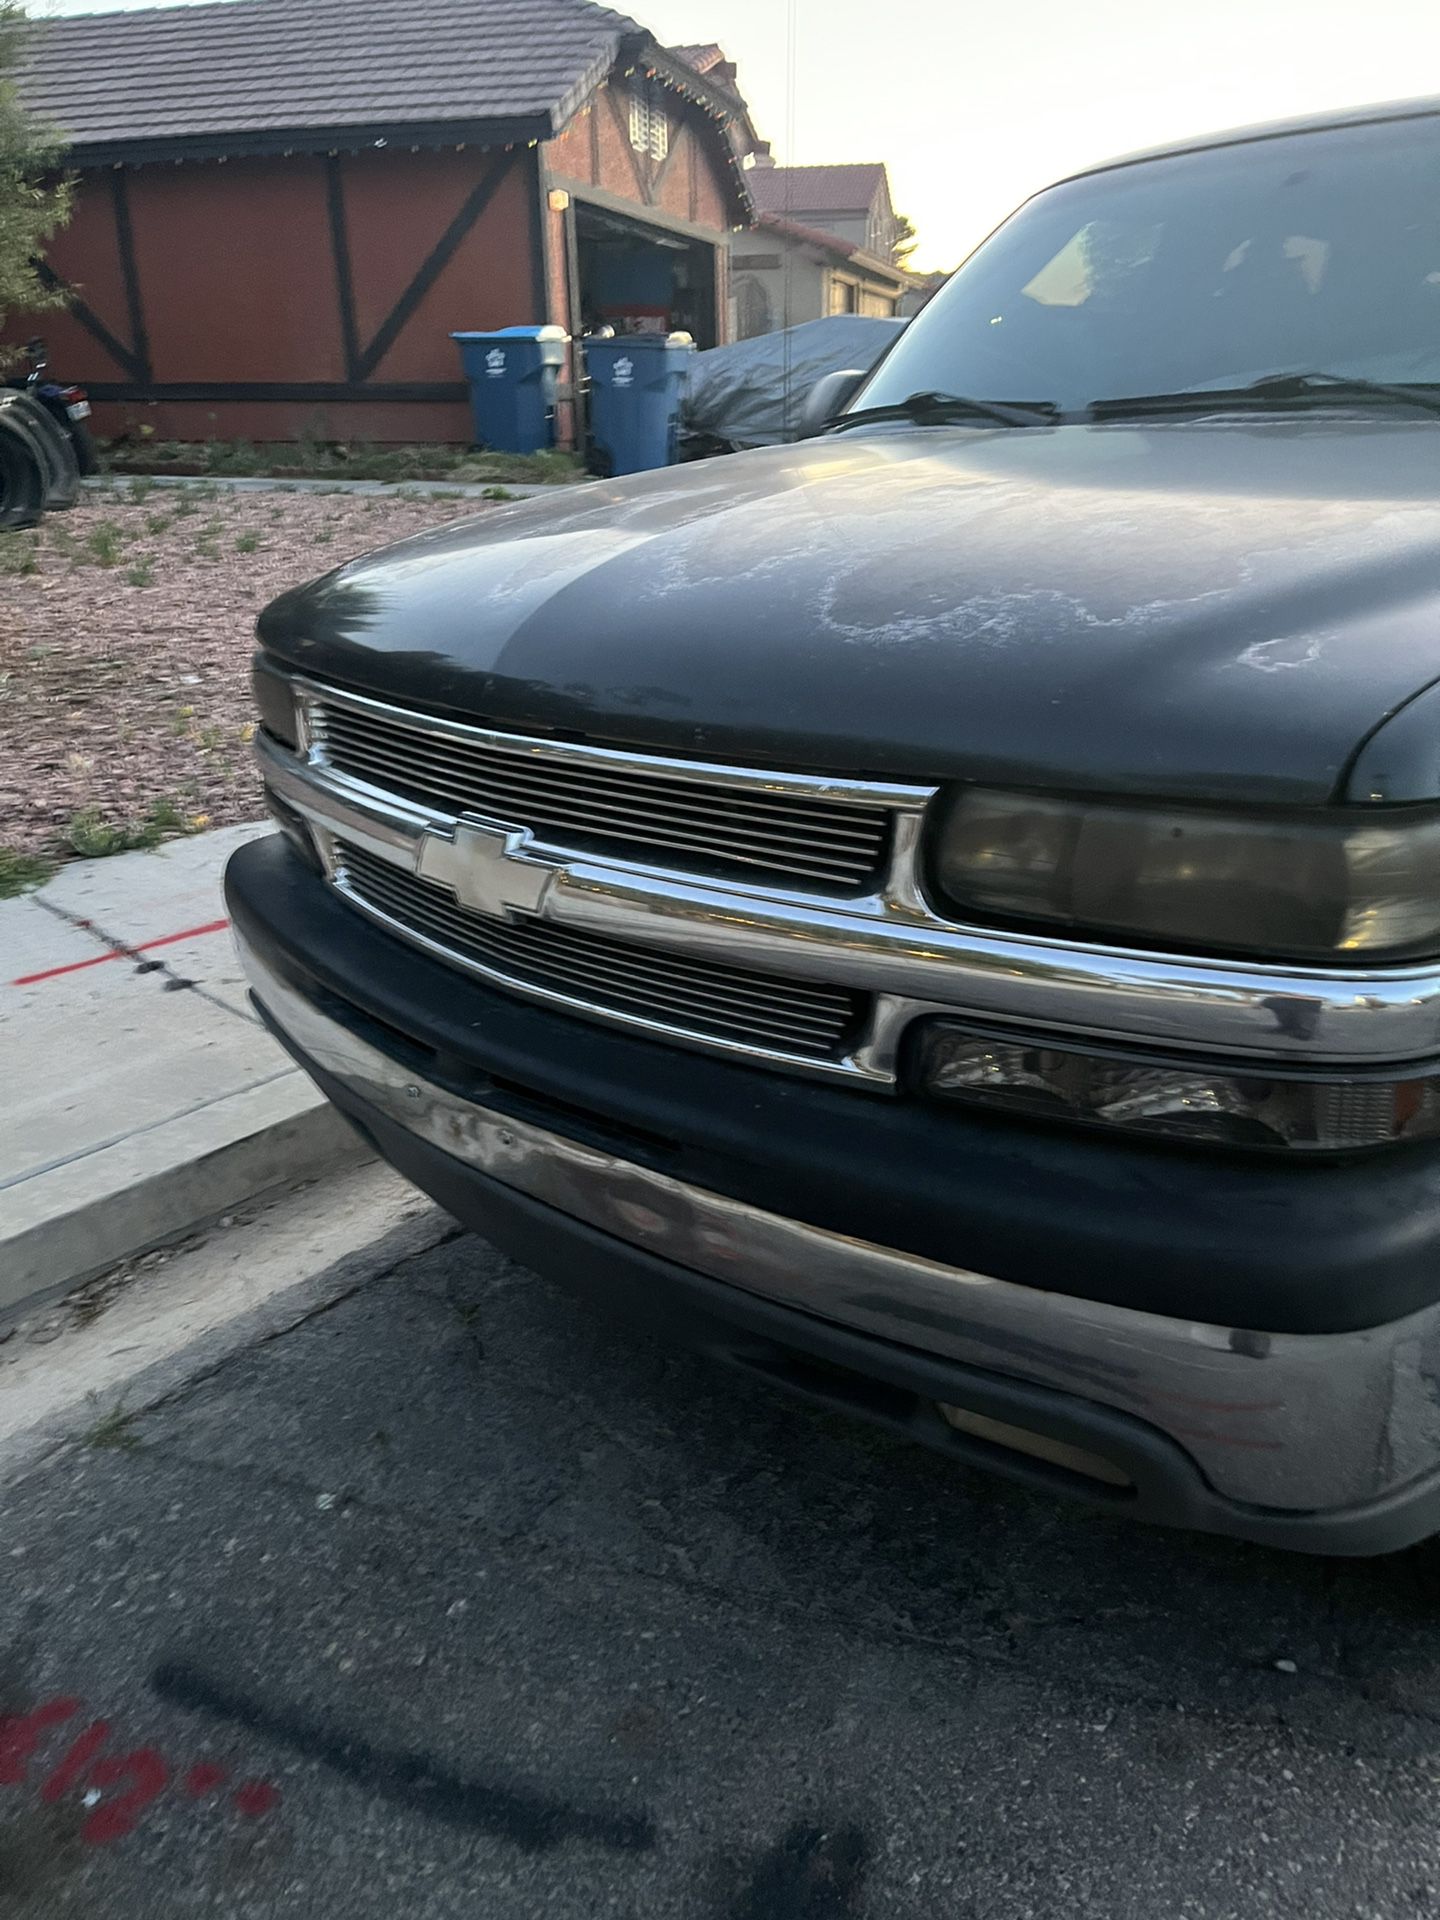 2003 Chevy Suburban For Parts